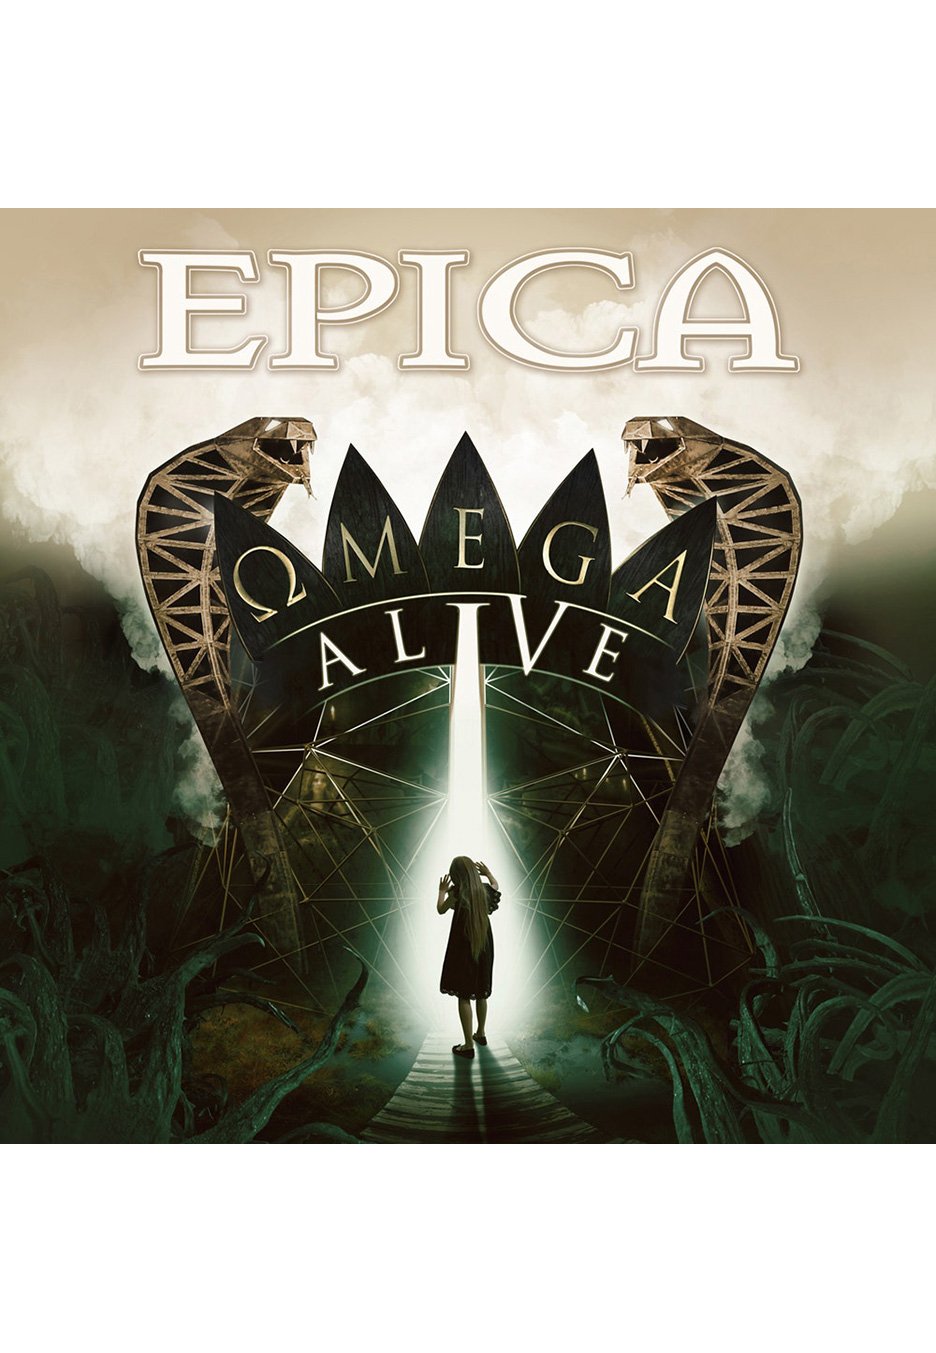 Epica - Omega Alive Earbook Light Green - Colored 3 Vinyl Earbook